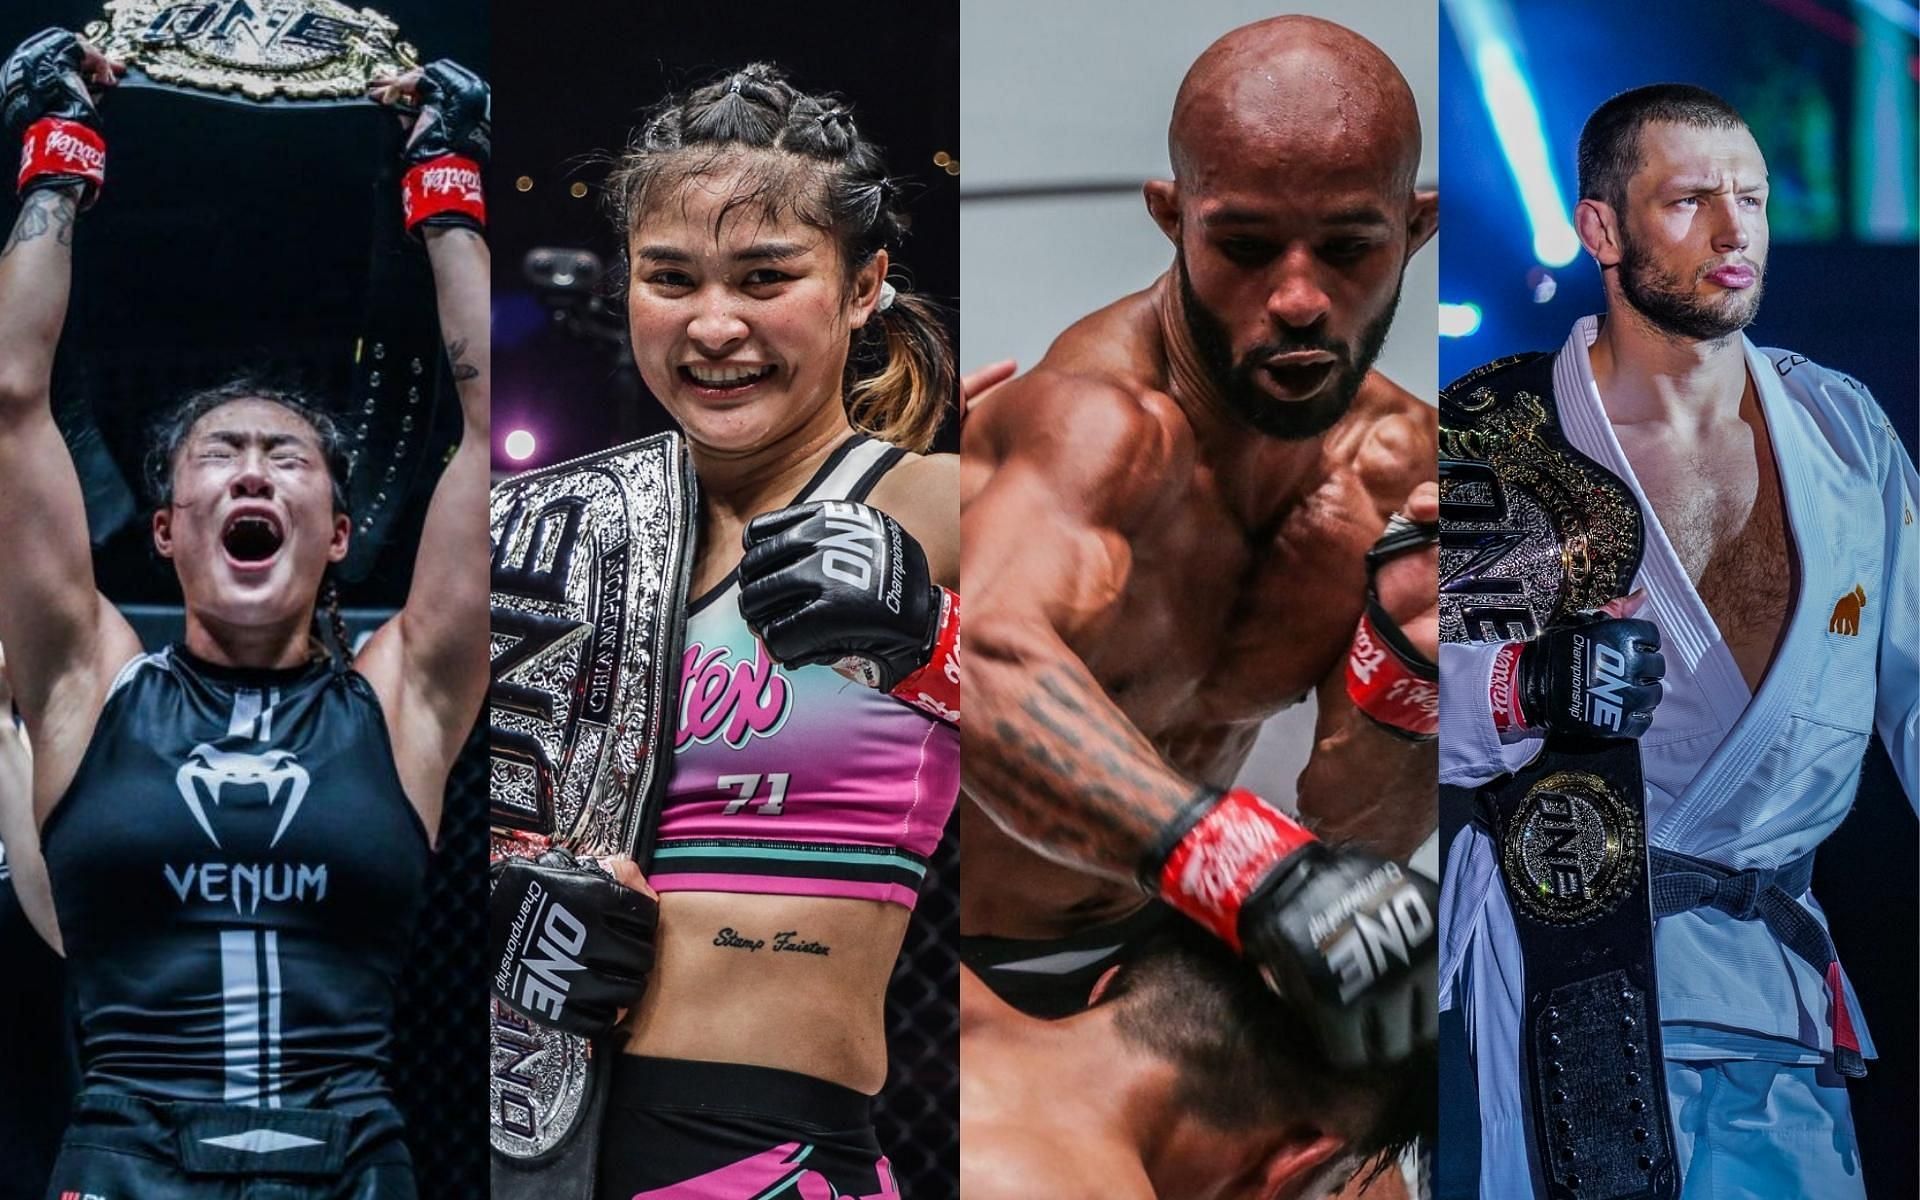 From left to right: Angela Lee, Stamp Fairtex, Demetrious Johnson and Reinier de Ridder are some of the big names attached to ONE X. (Images courtesy of ONE Championship)